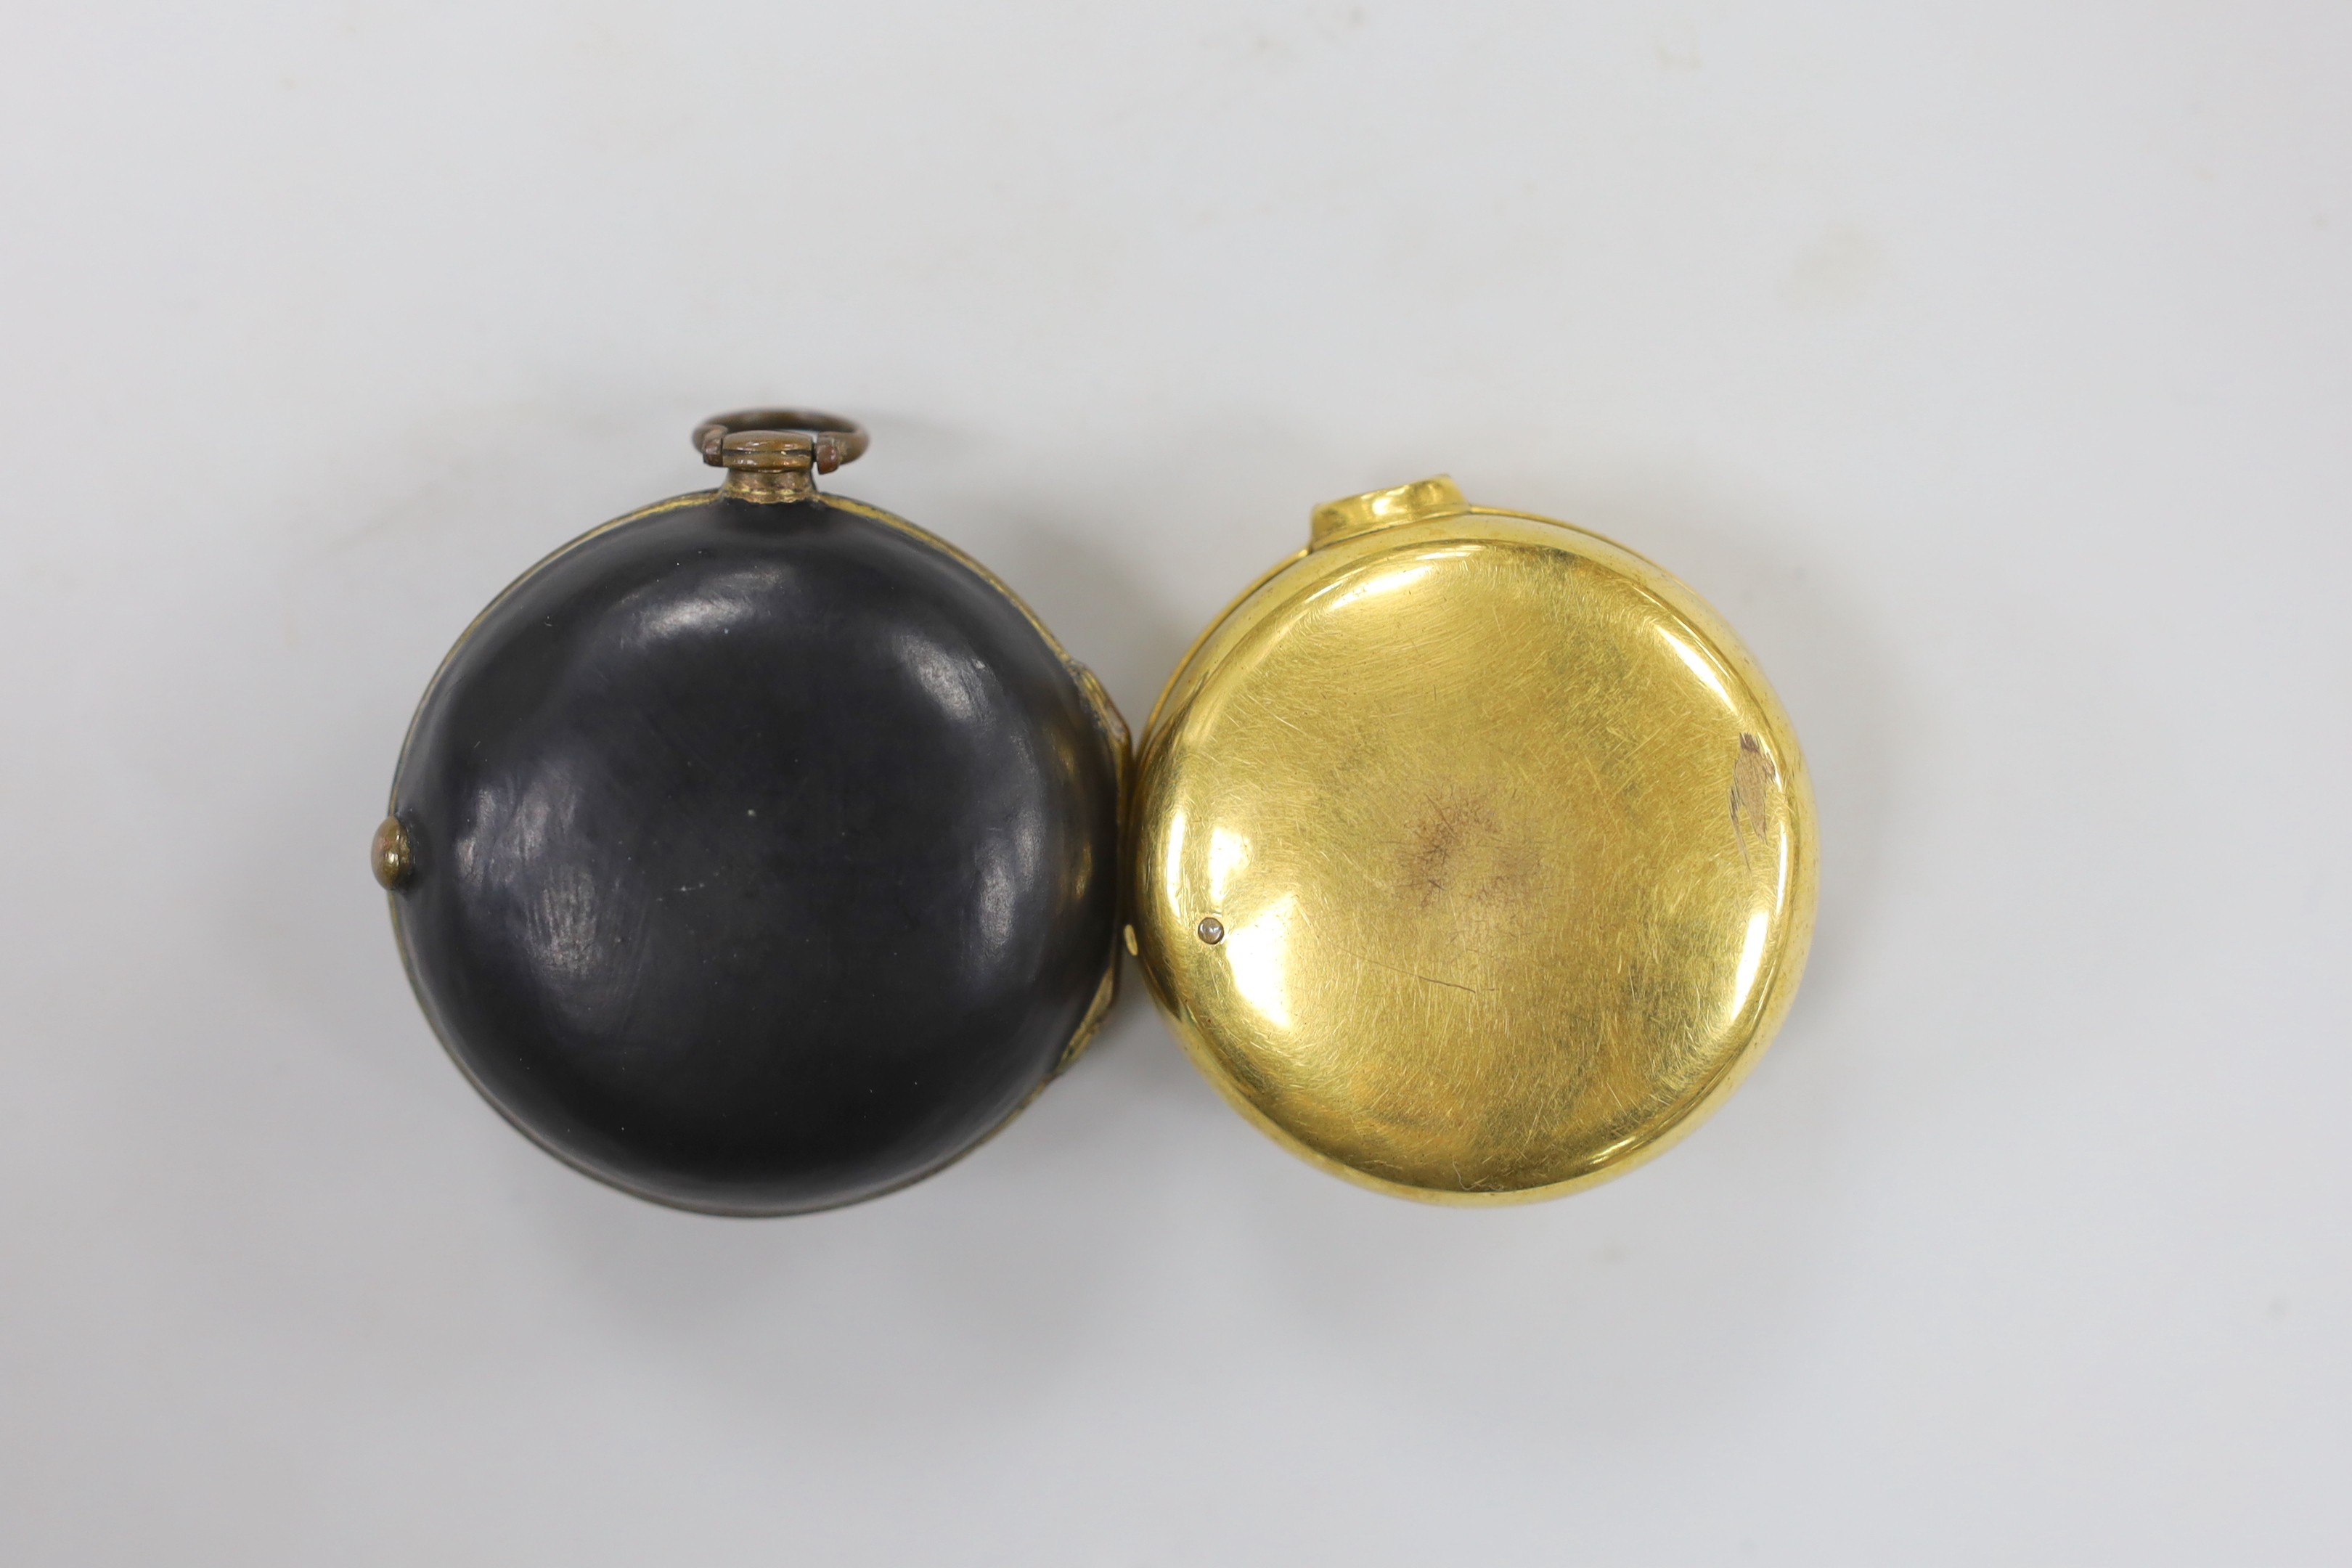 An 18th century gilt metal pair cased keywind verge pocket watch, by Frank Upjohn of London (a.f.) and a similar pocket watch by J. Edmond of Liverpool.